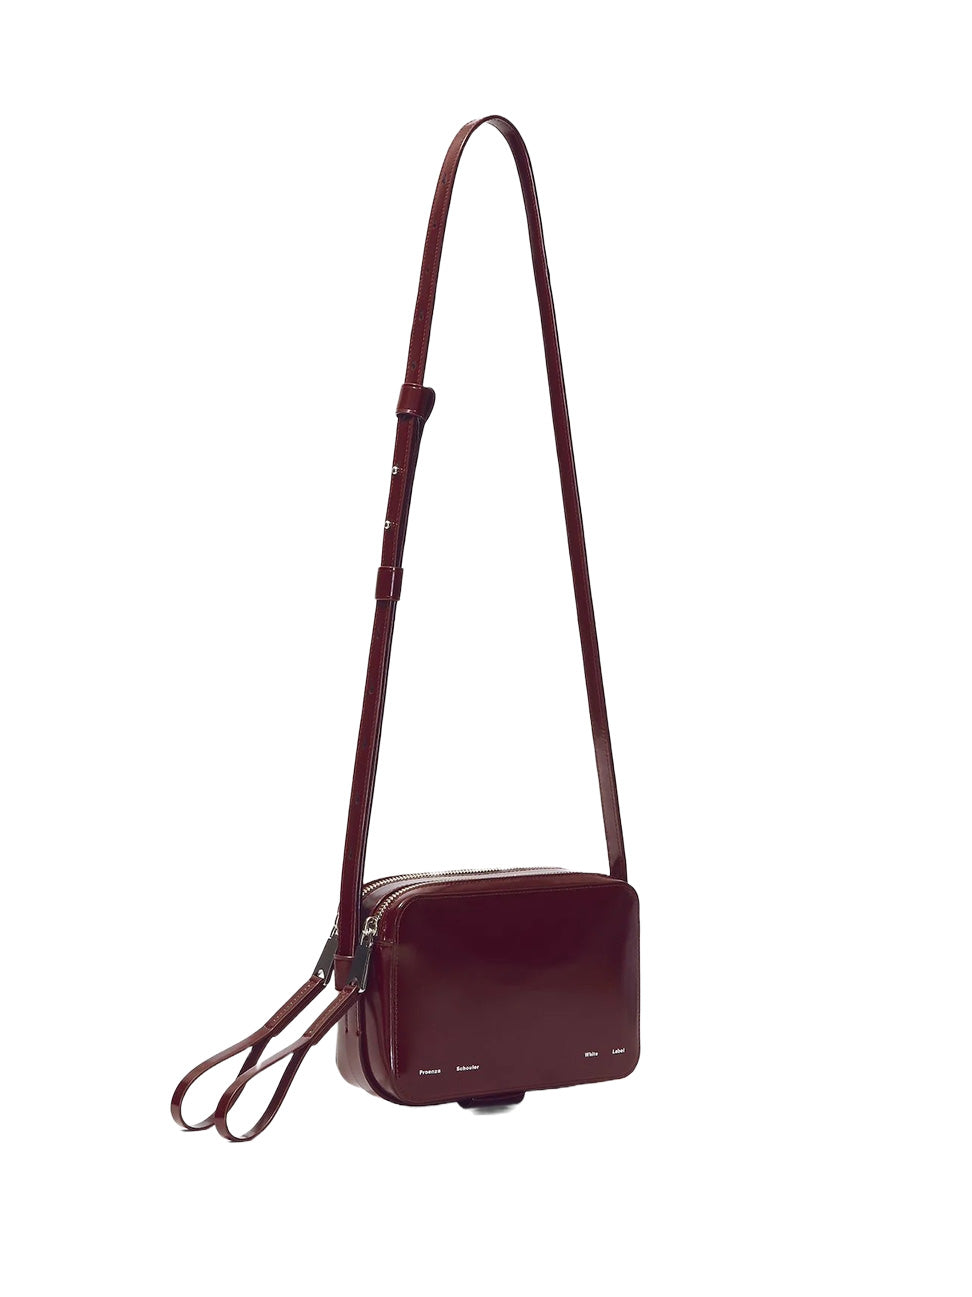 Watts Leather Camera Bag in Bordeaux